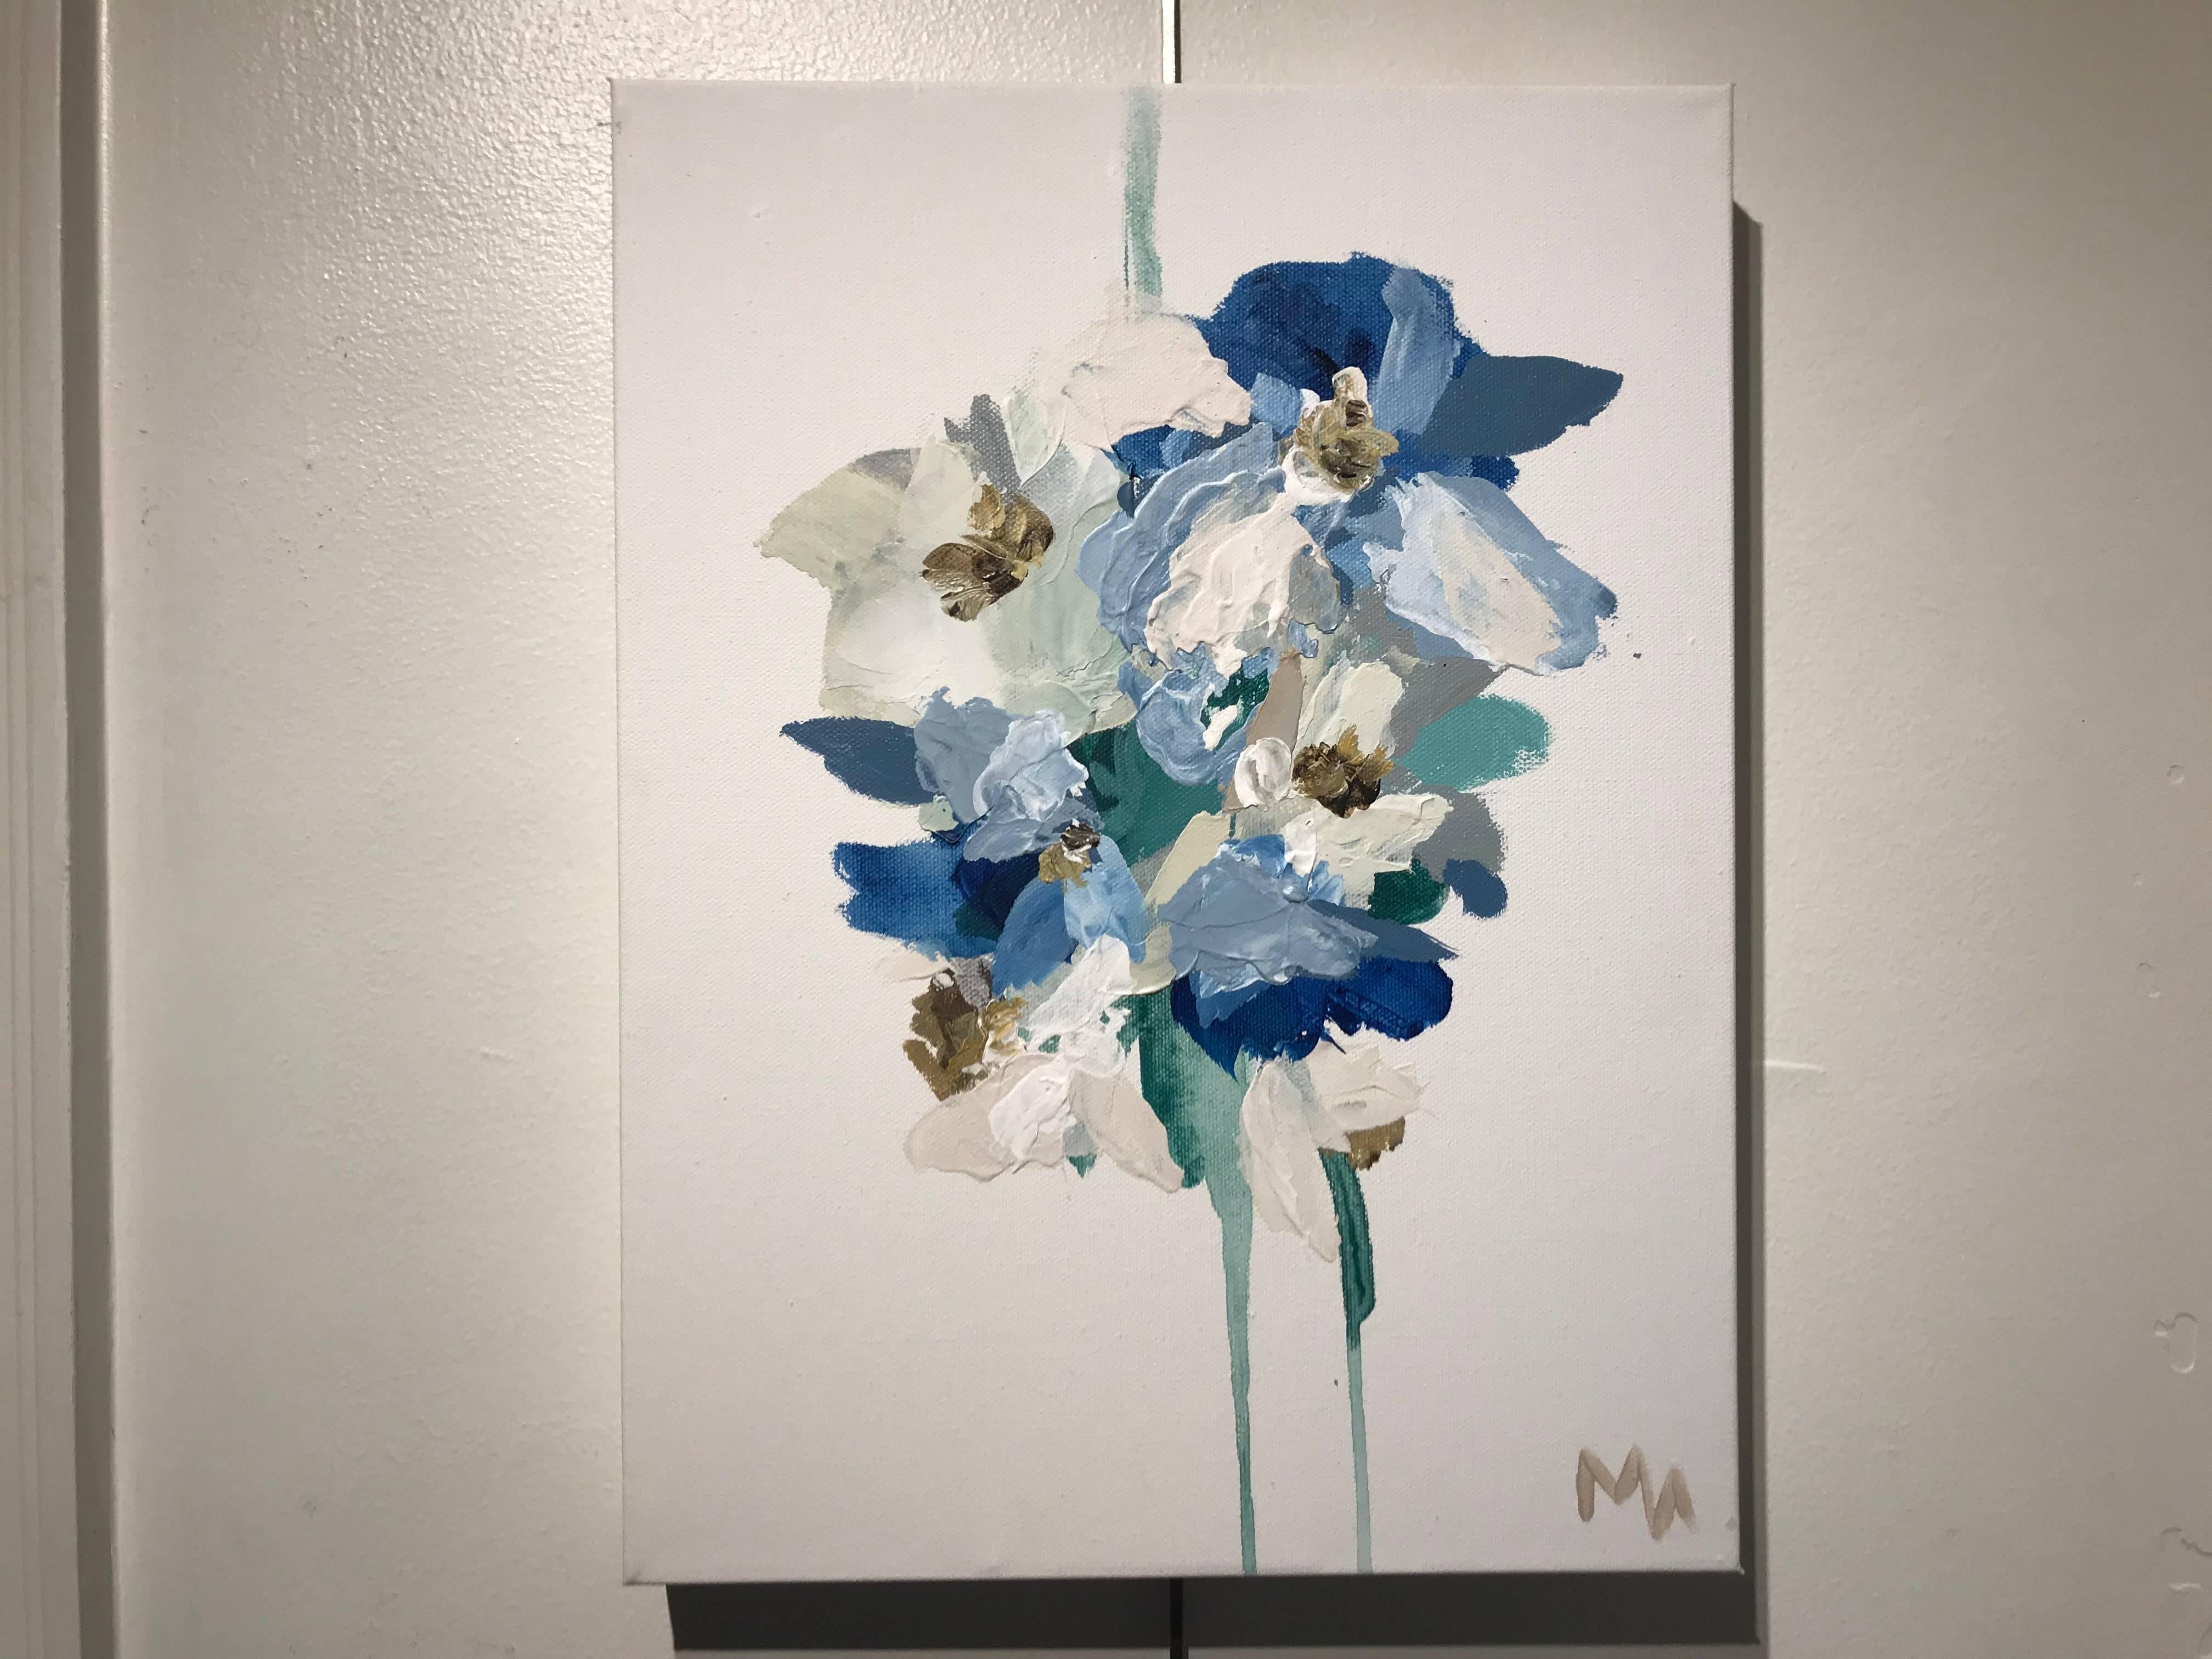 'A Bundle of Seedlings No. 5' Petite Contemporary Floral Painting - Gray Abstract Painting by Mia Frandsen